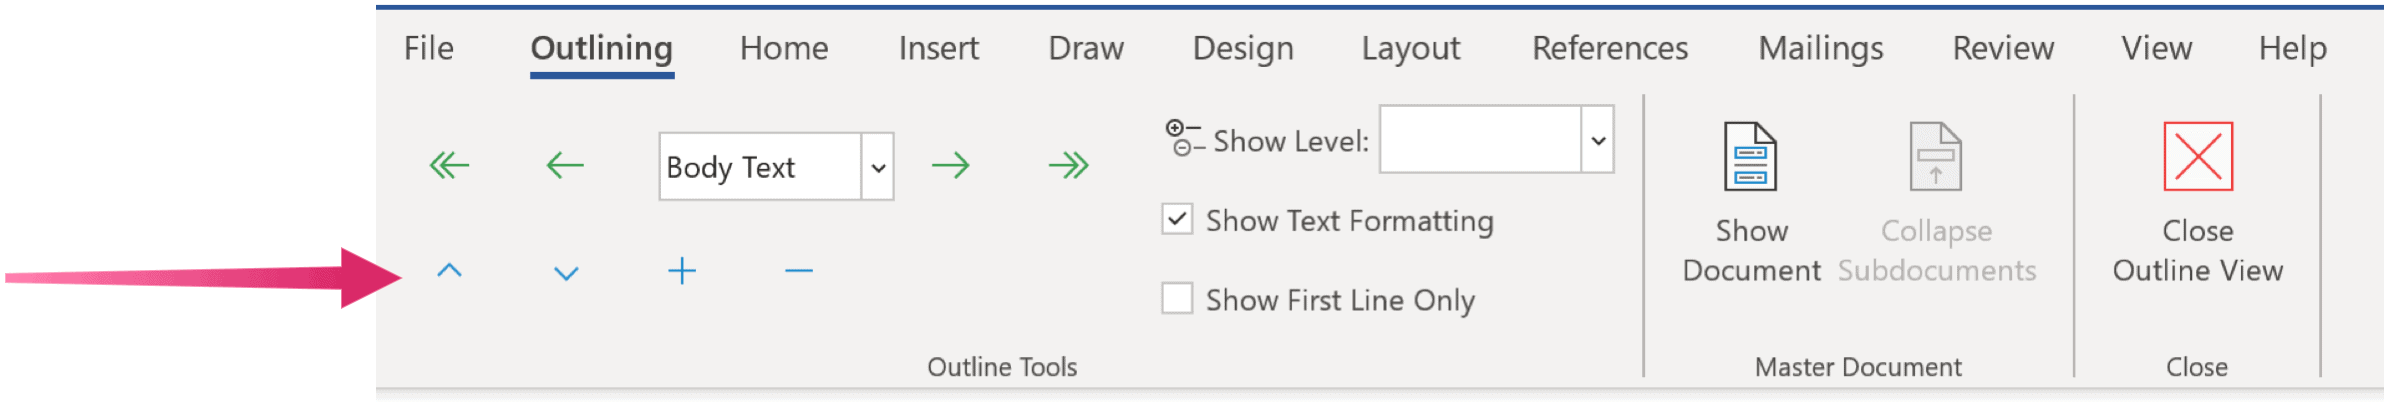 Outline View on Microsoft Word